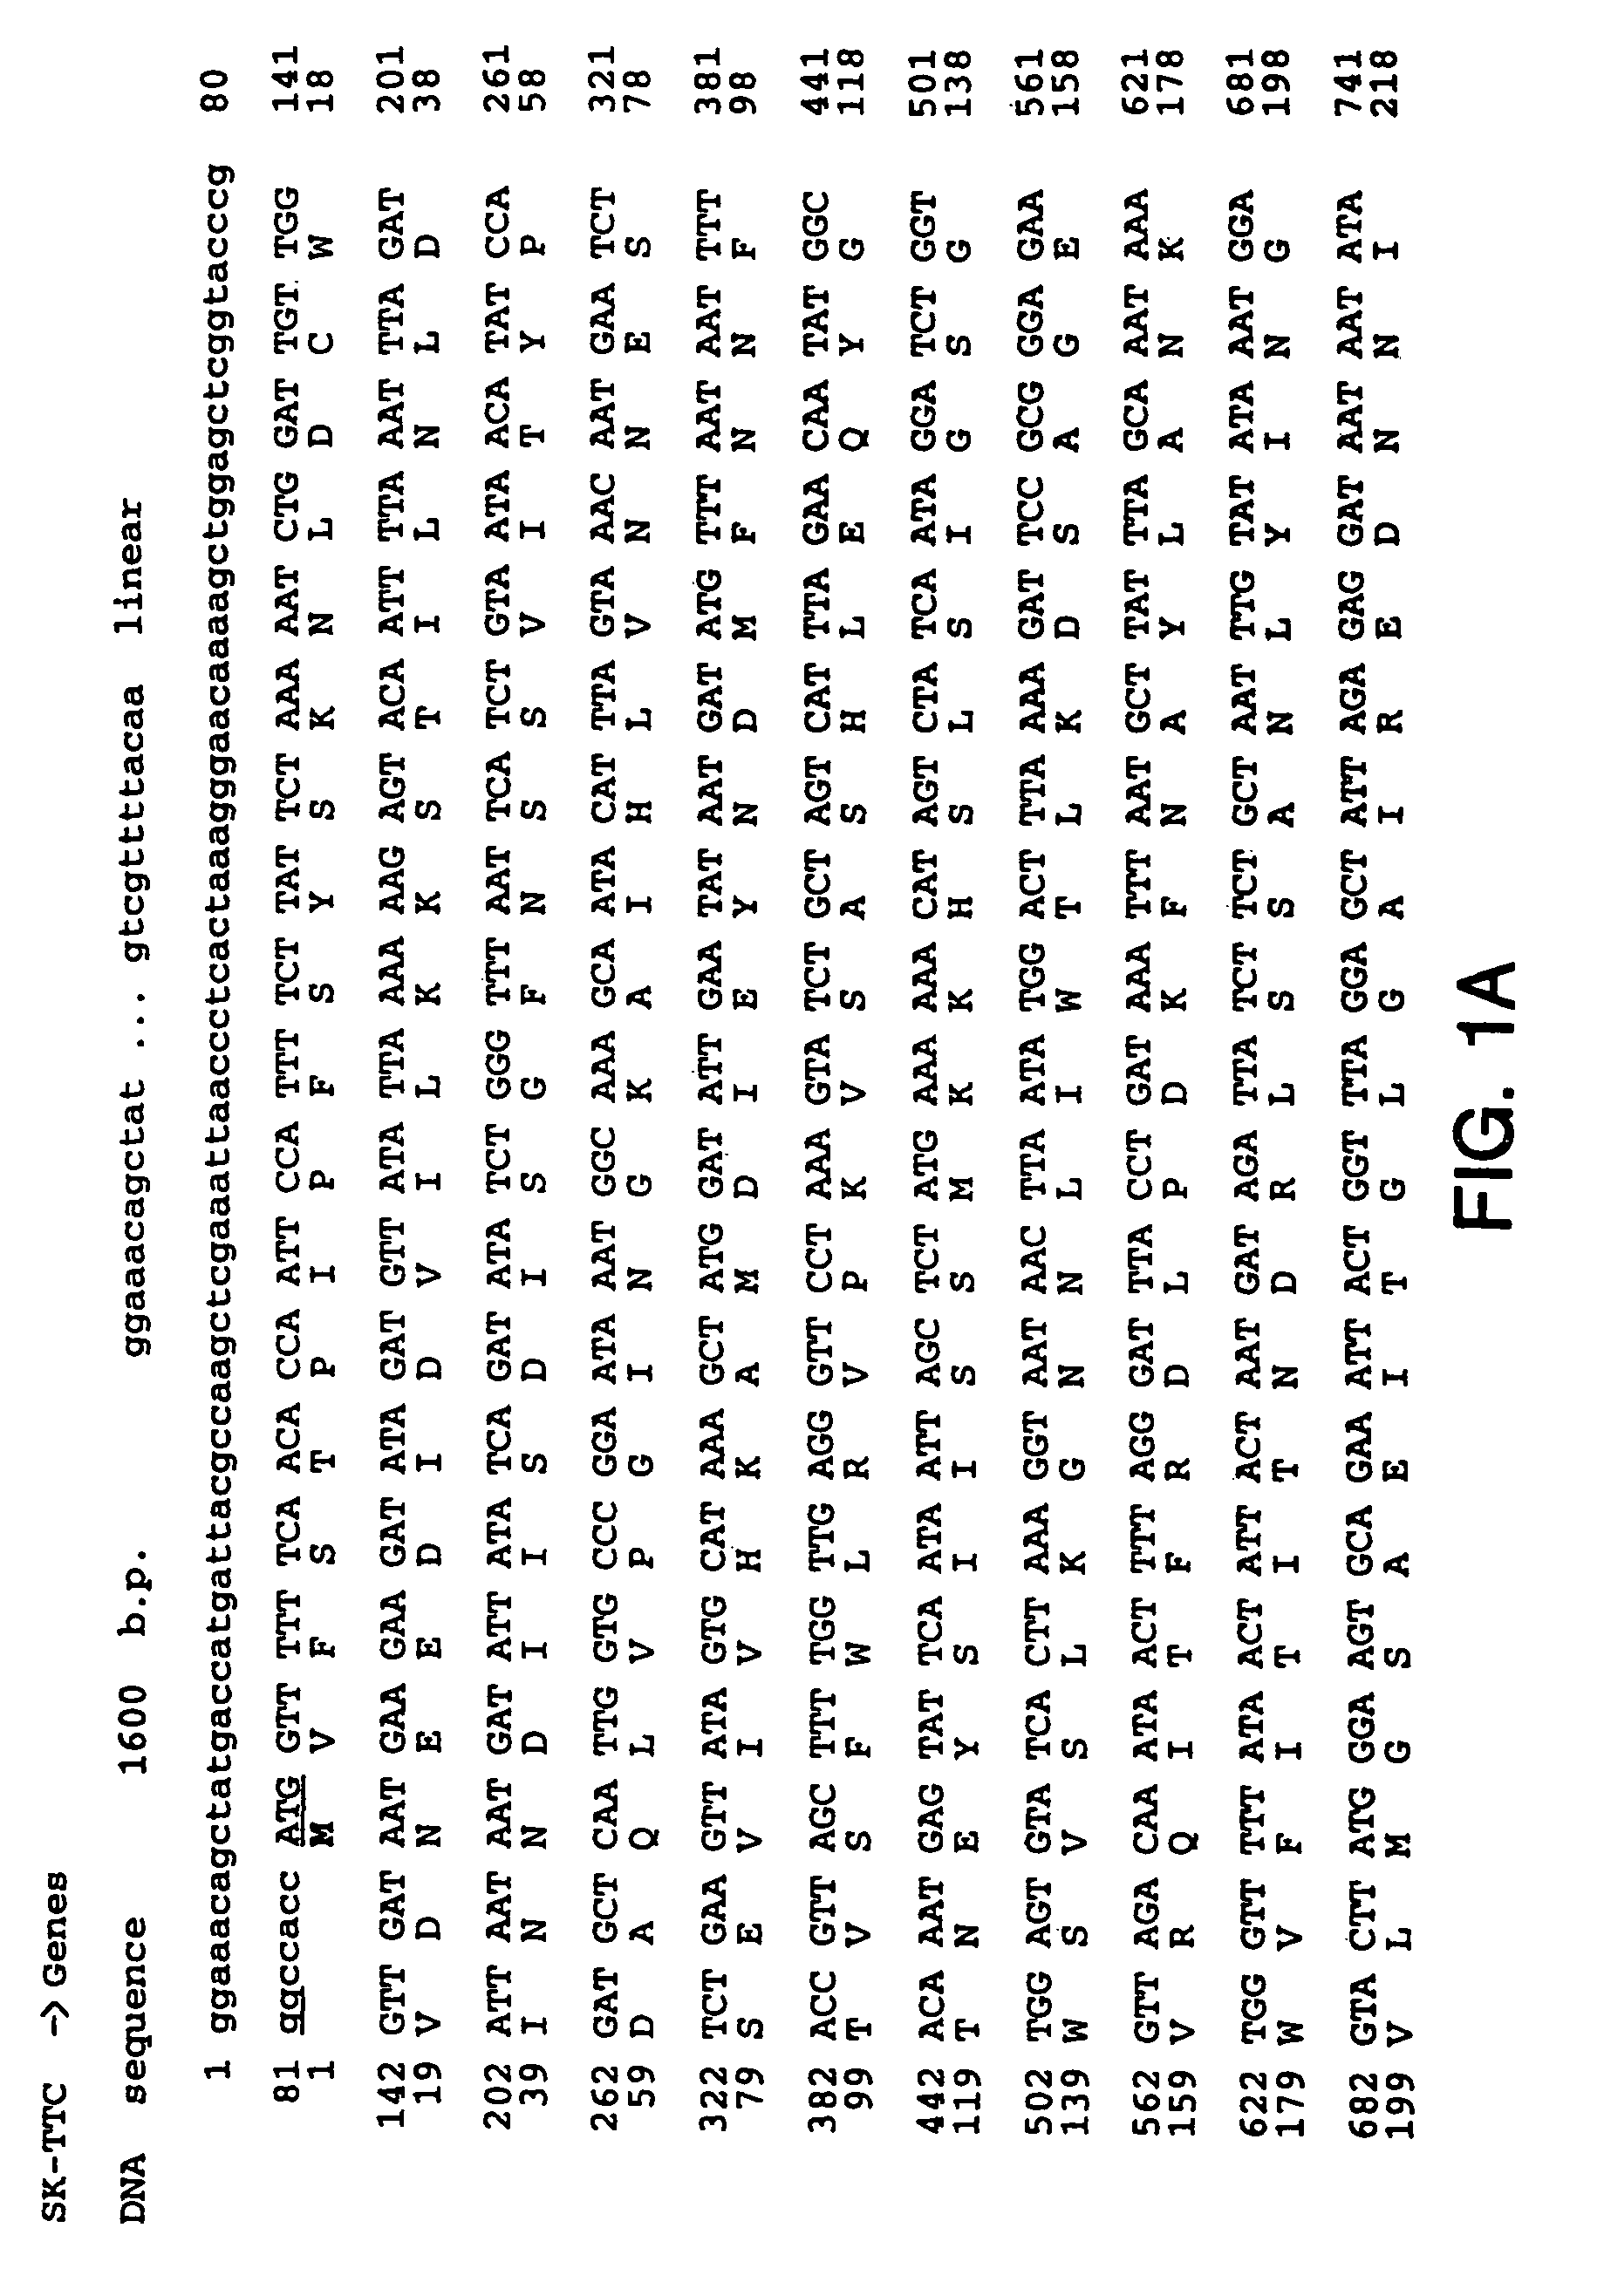 Methods for direct visualization of active synapses